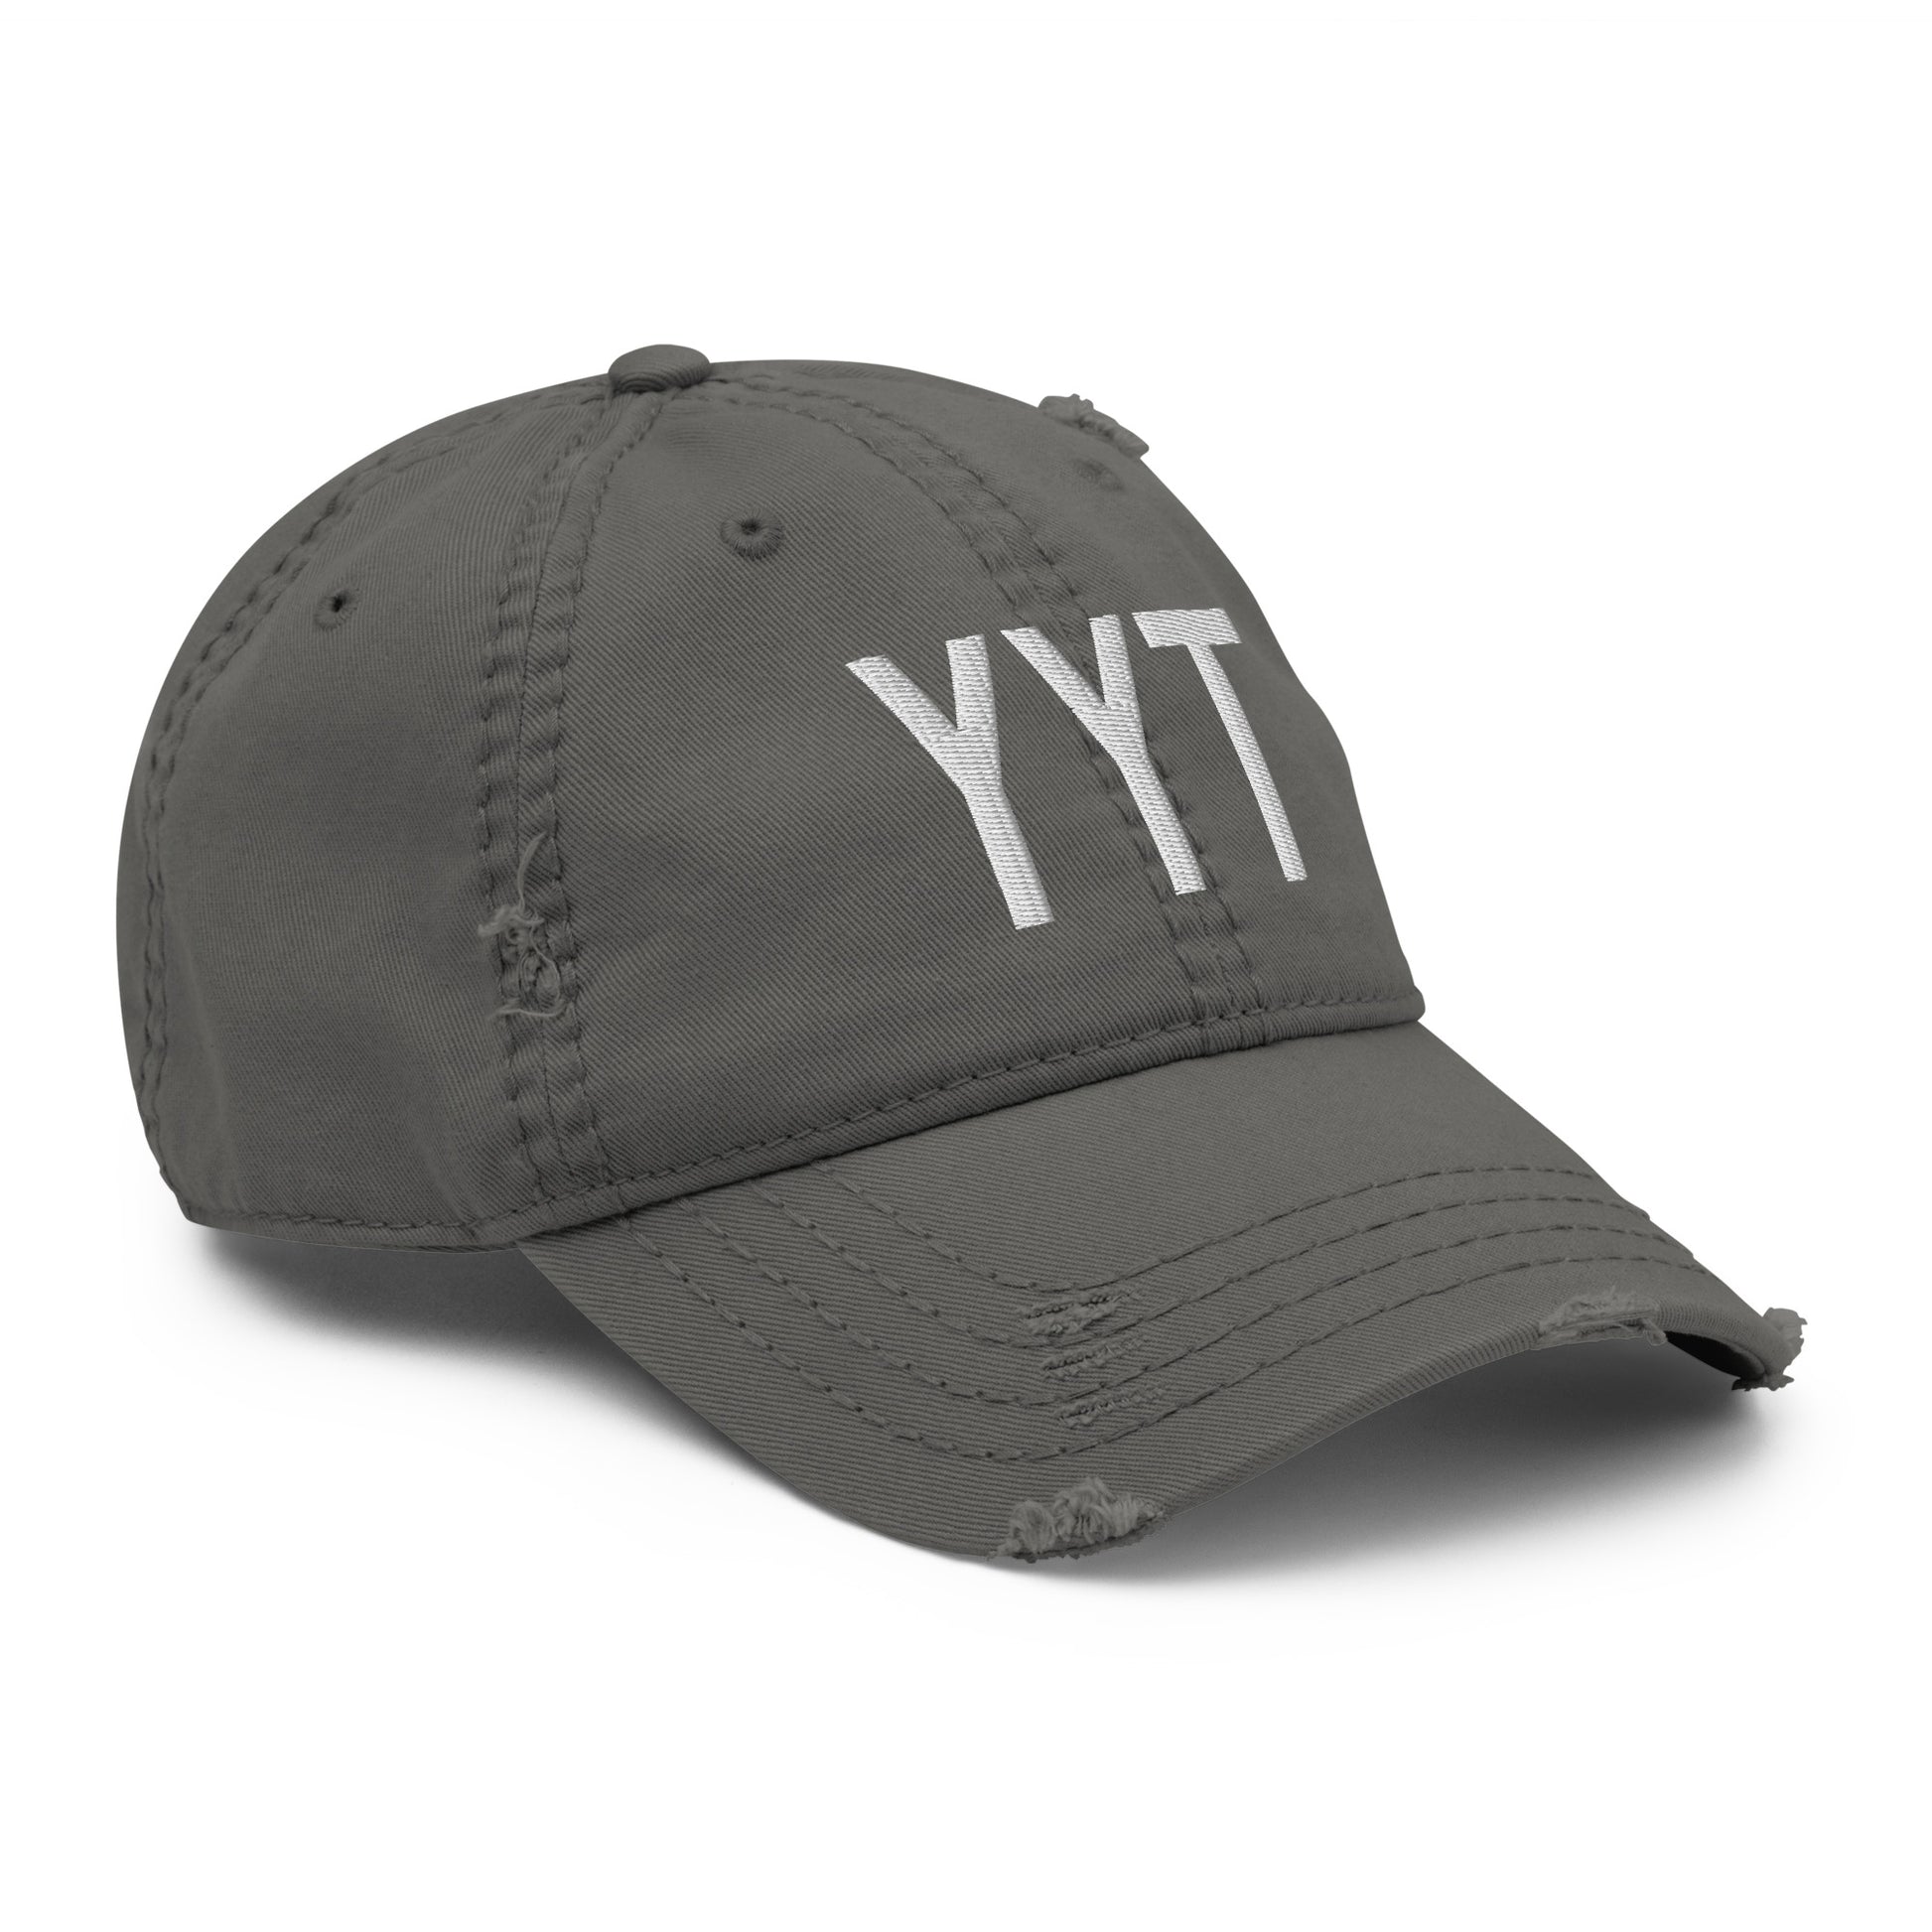 Airport Code Distressed Hat - White • YYT St. John's • YHM Designs - Image 17